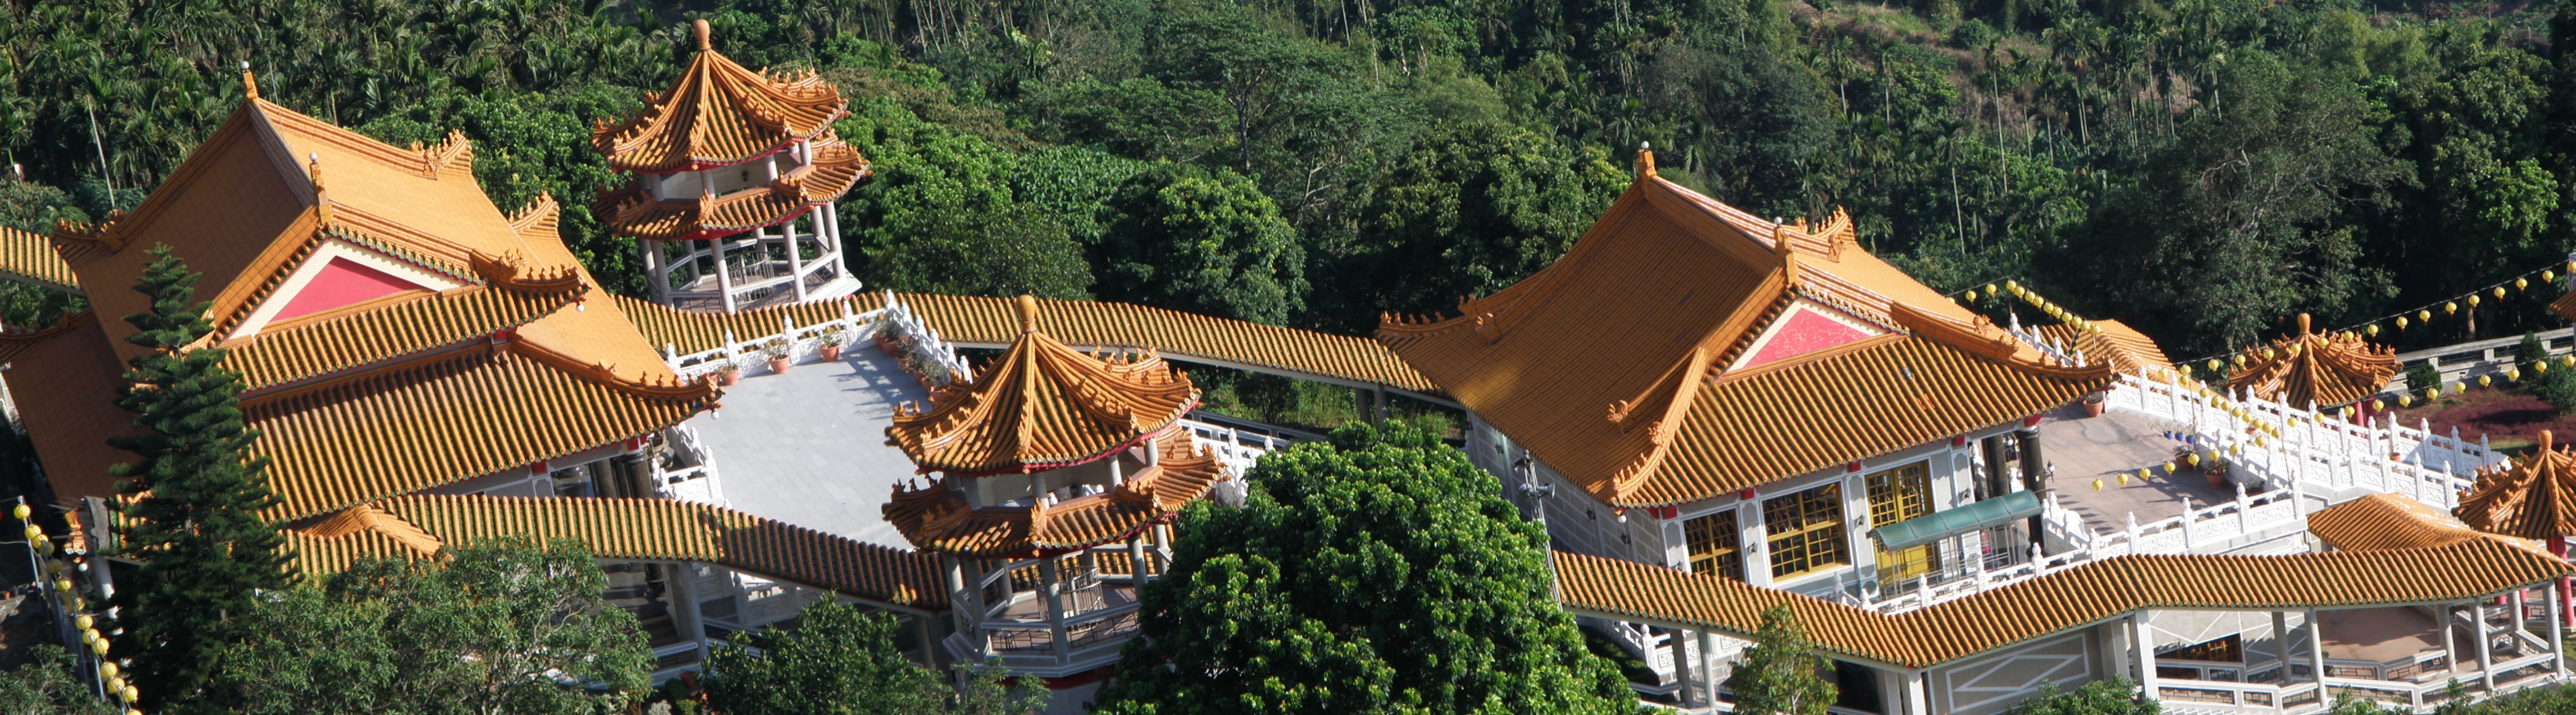 Temple in panorama, Building, Forest, Green, Orange, HQ Photo